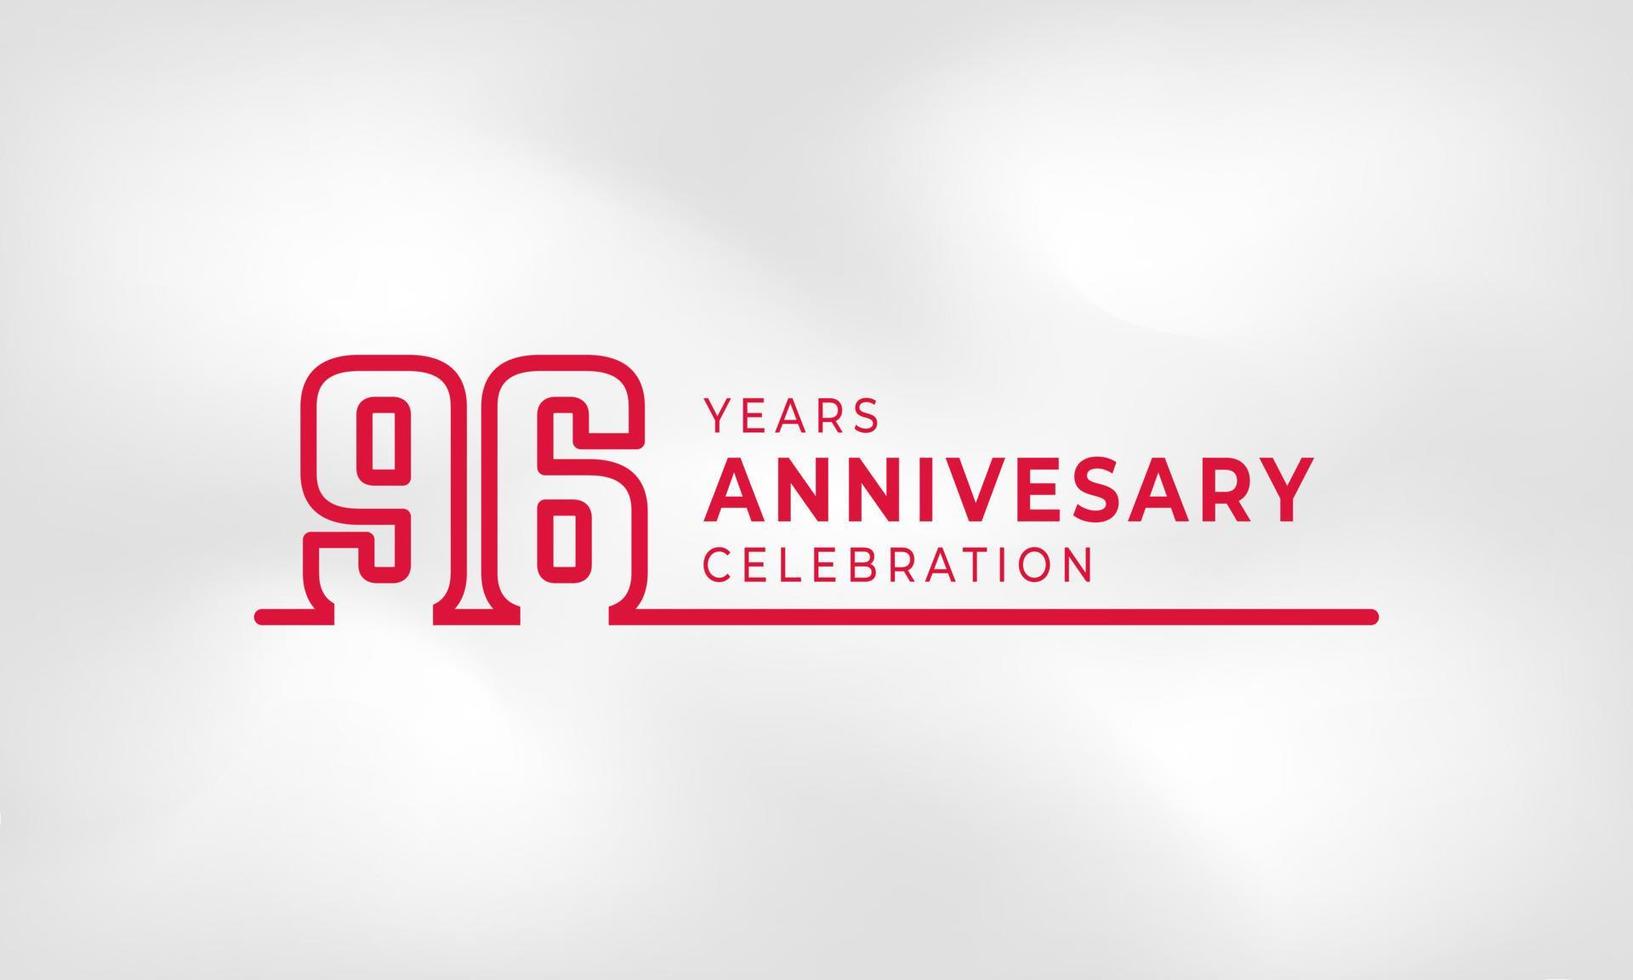 96 Year Anniversary Celebration Linked Logotype Outline Number Red Color for Celebration Event, Wedding, Greeting card, and Invitation Isolated on White Texture Background vector